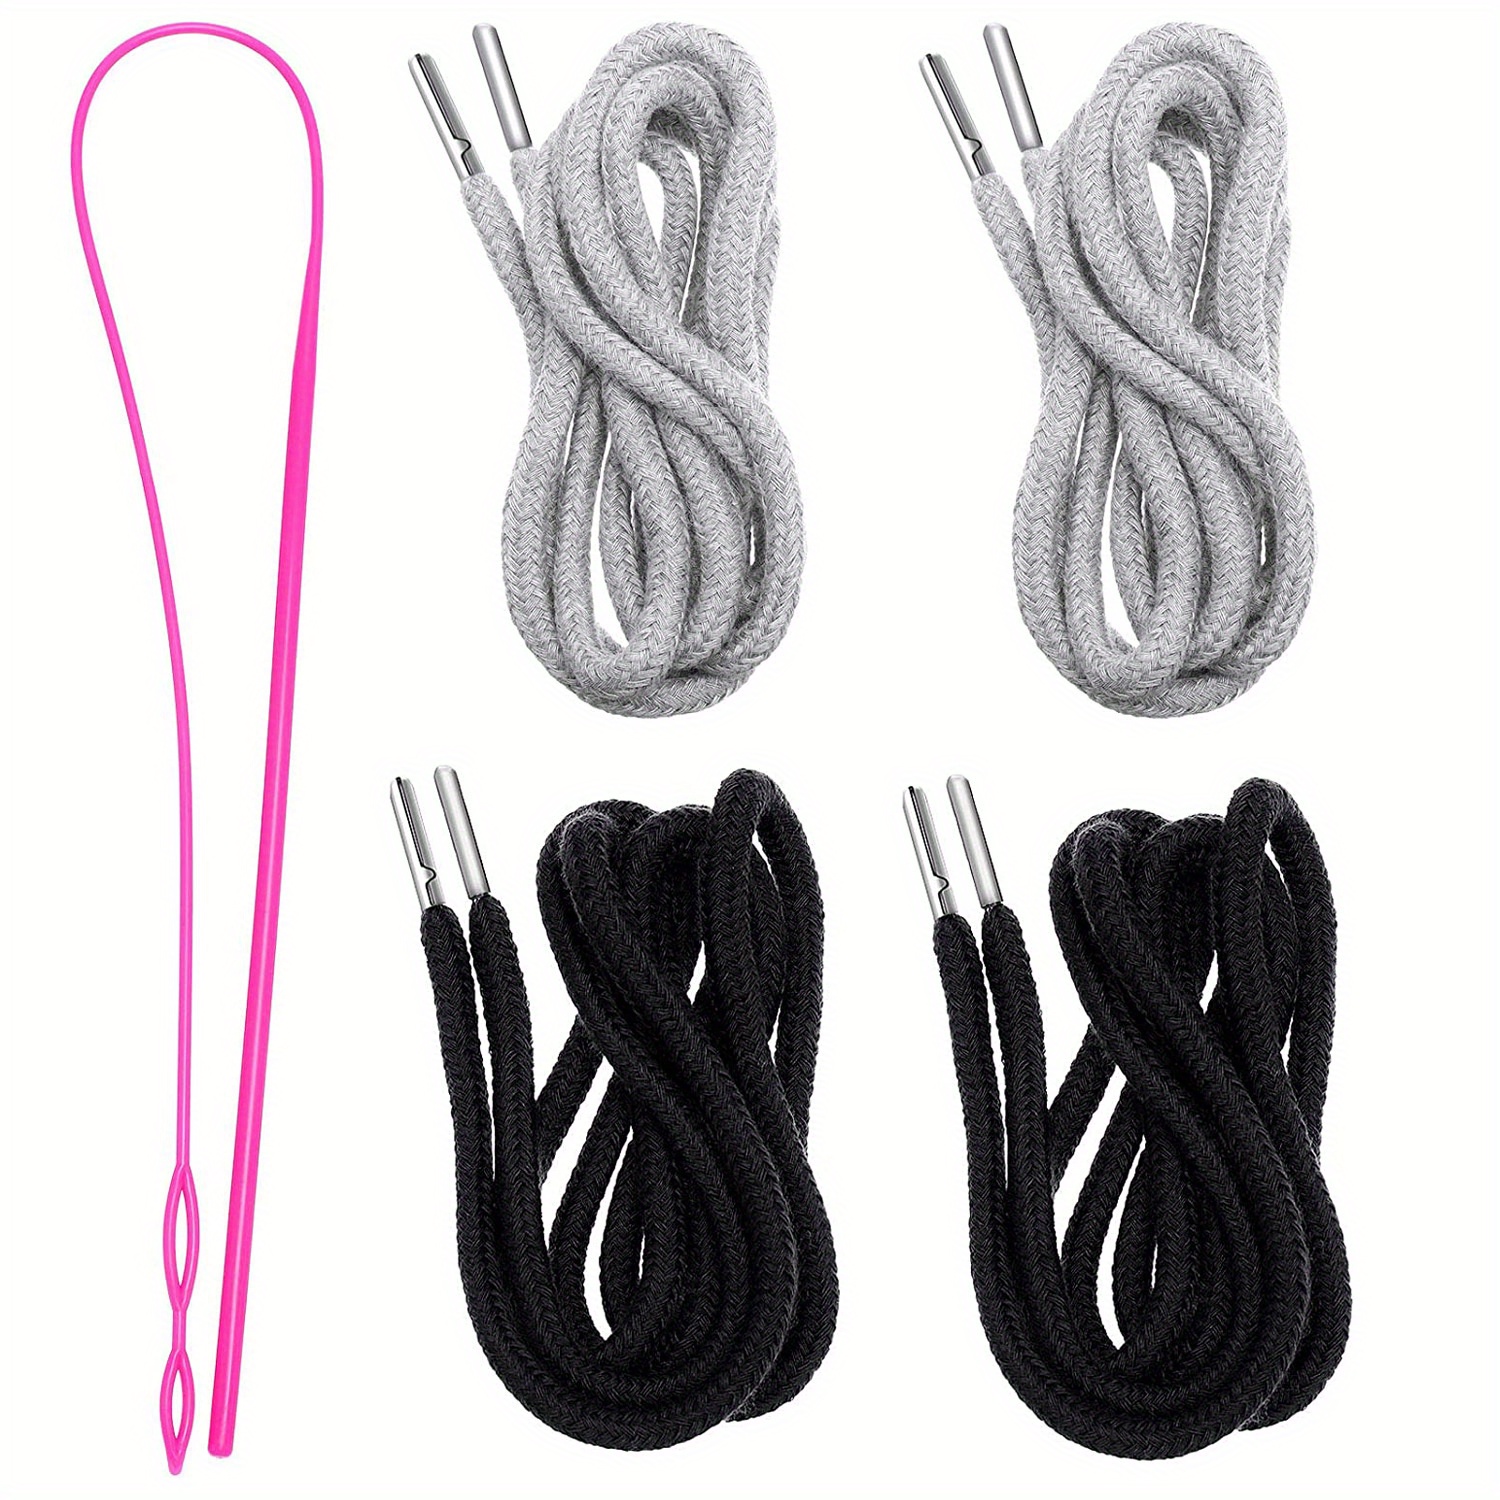 4 Pcs 52 Inch Replacement Drawstring Cords Universal Drawstring Replacement  Clothing Drawstring for Sweatpants Shorts Hoodies 